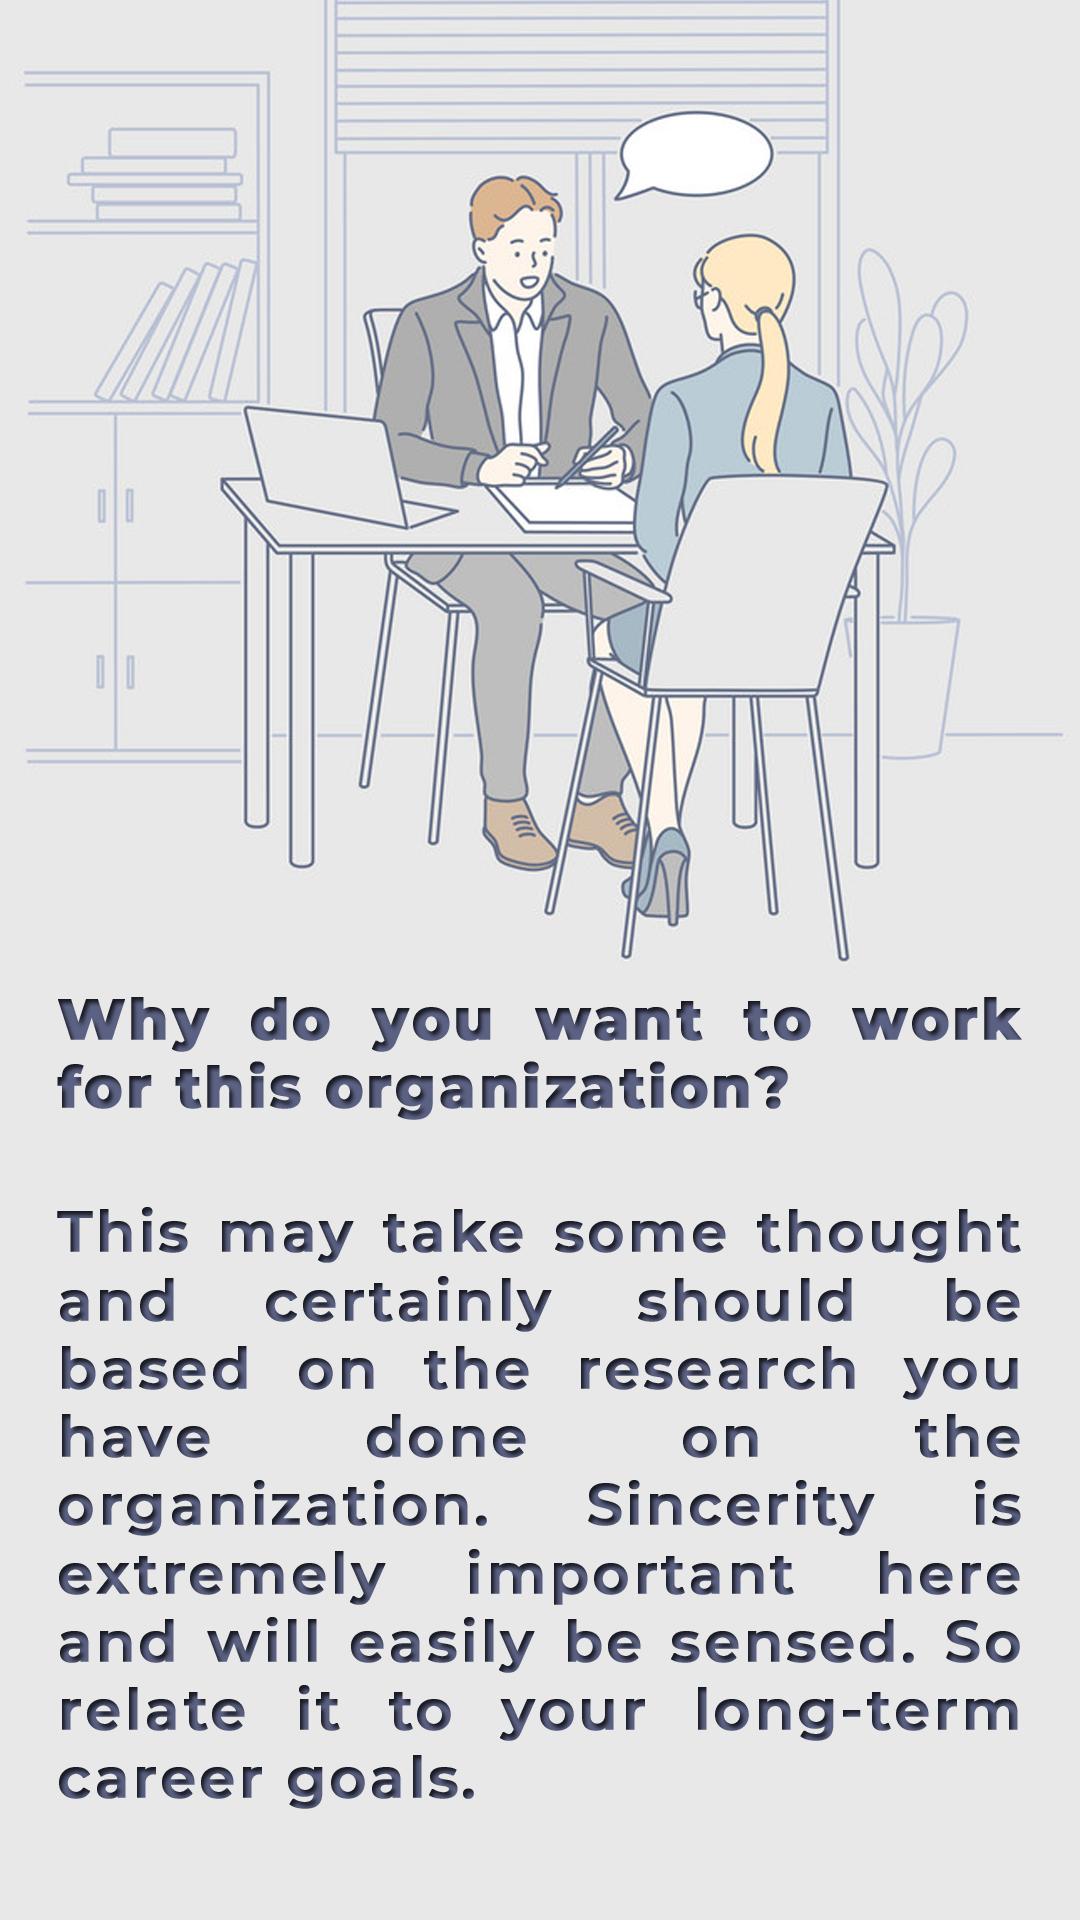 Why do you want to work for this organization?